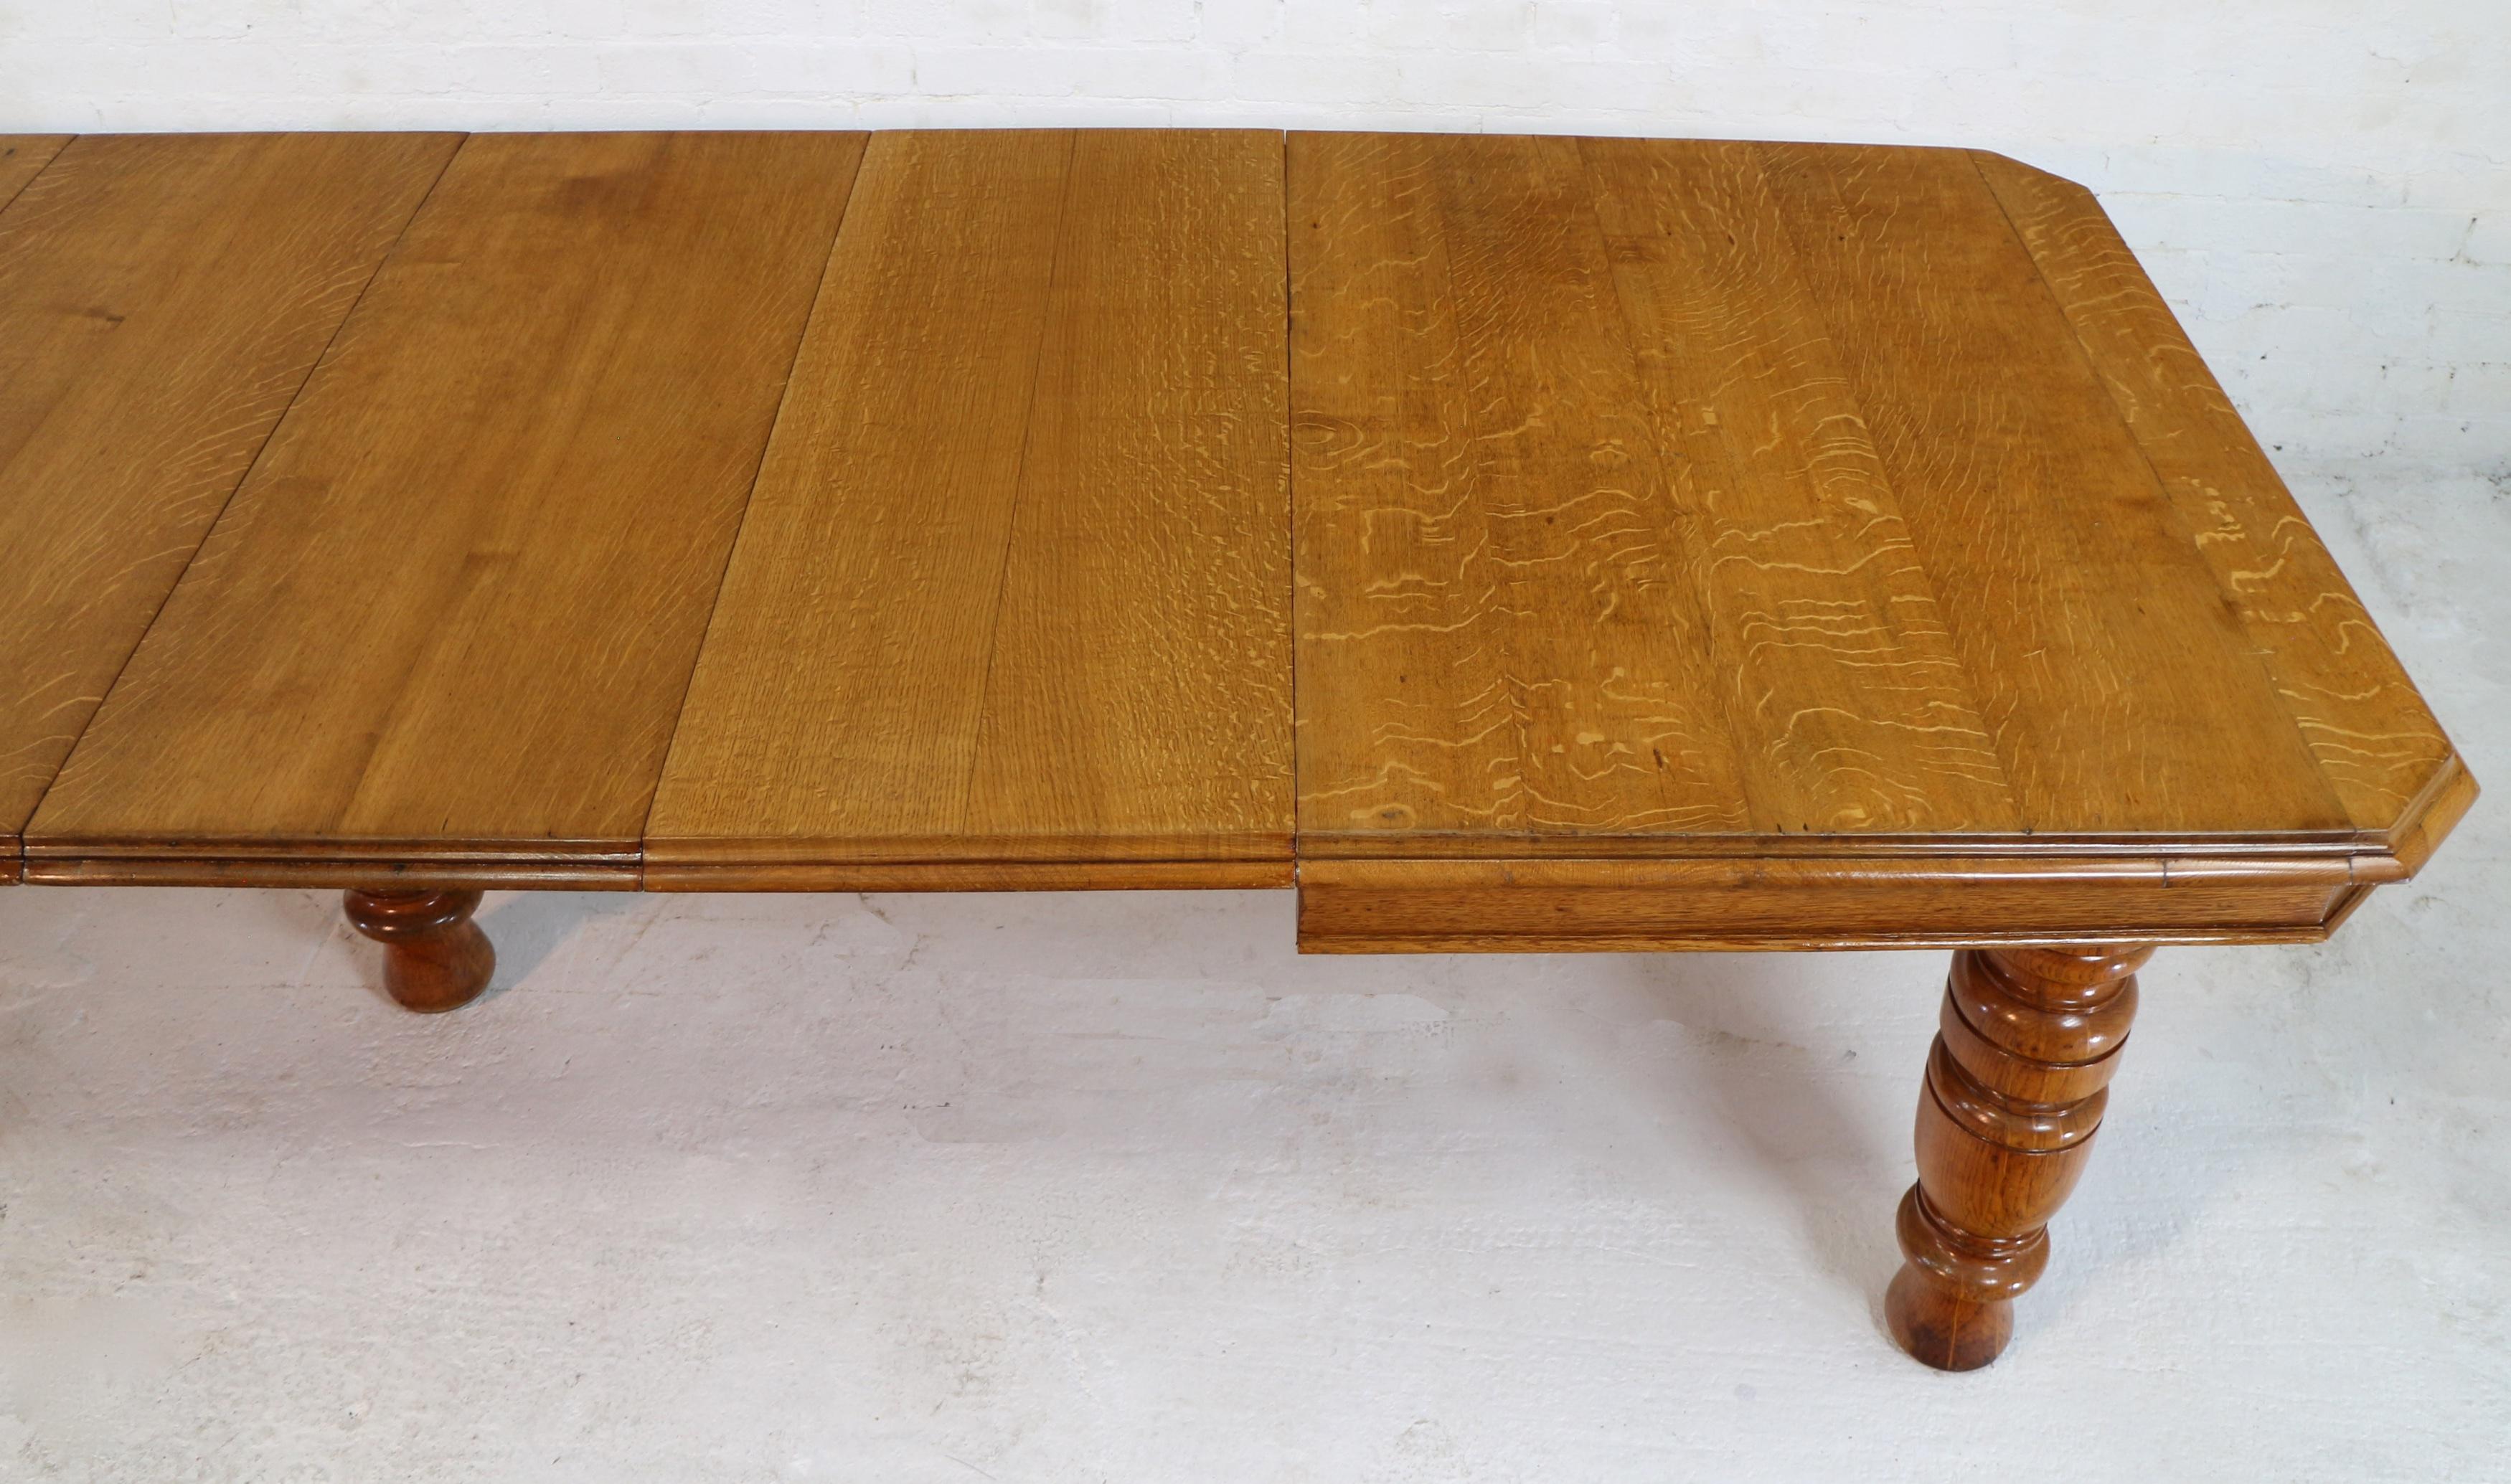 Steel Antique English Victorian Oak Extending Dining Table & 4 Leaves, 12ft/Seats 14 For Sale